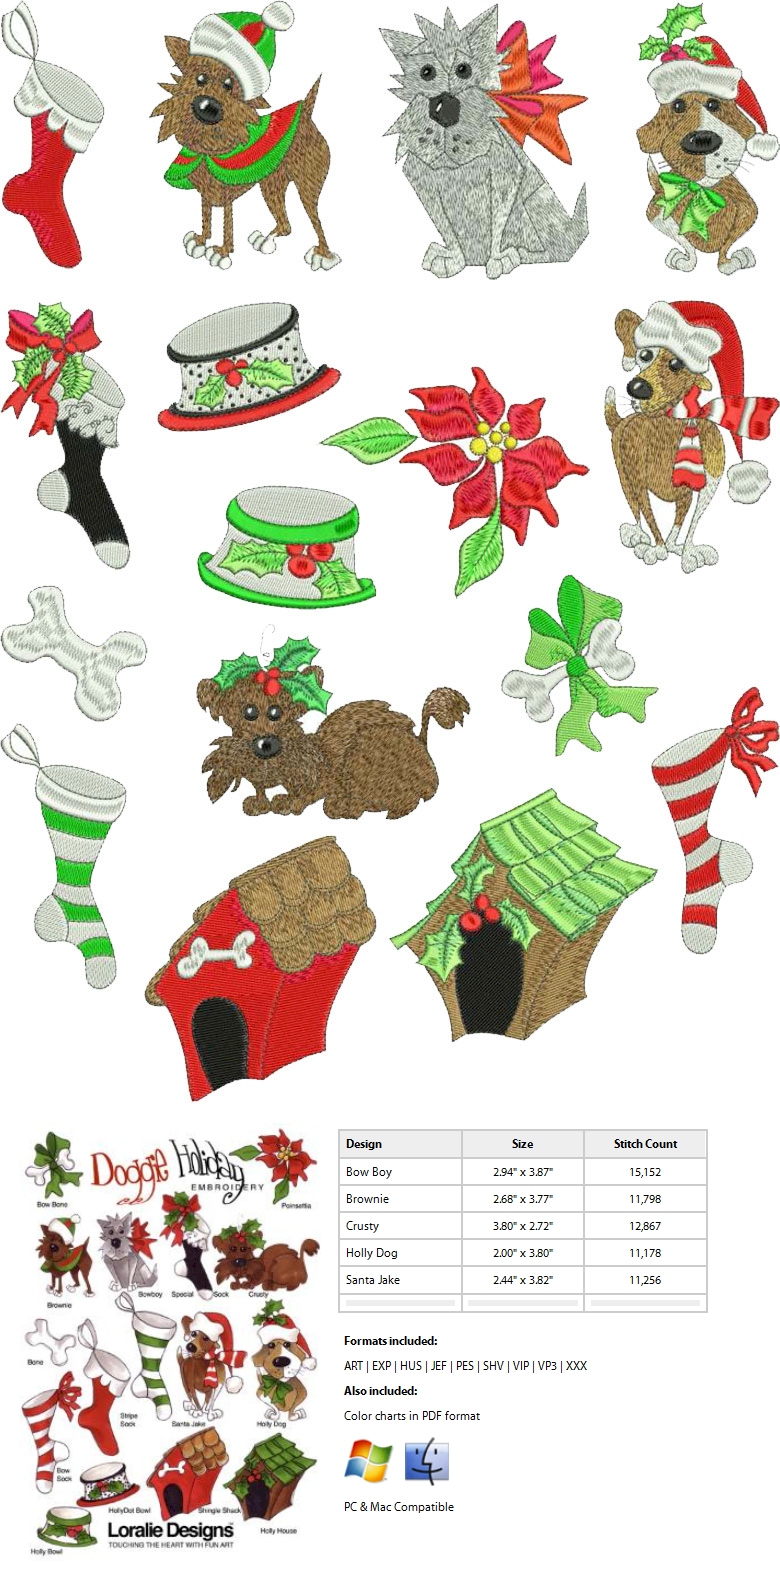 Doggie Holiday by Loralie Designs Embroidery Designs on a Multi-Format CD-ROM 630114